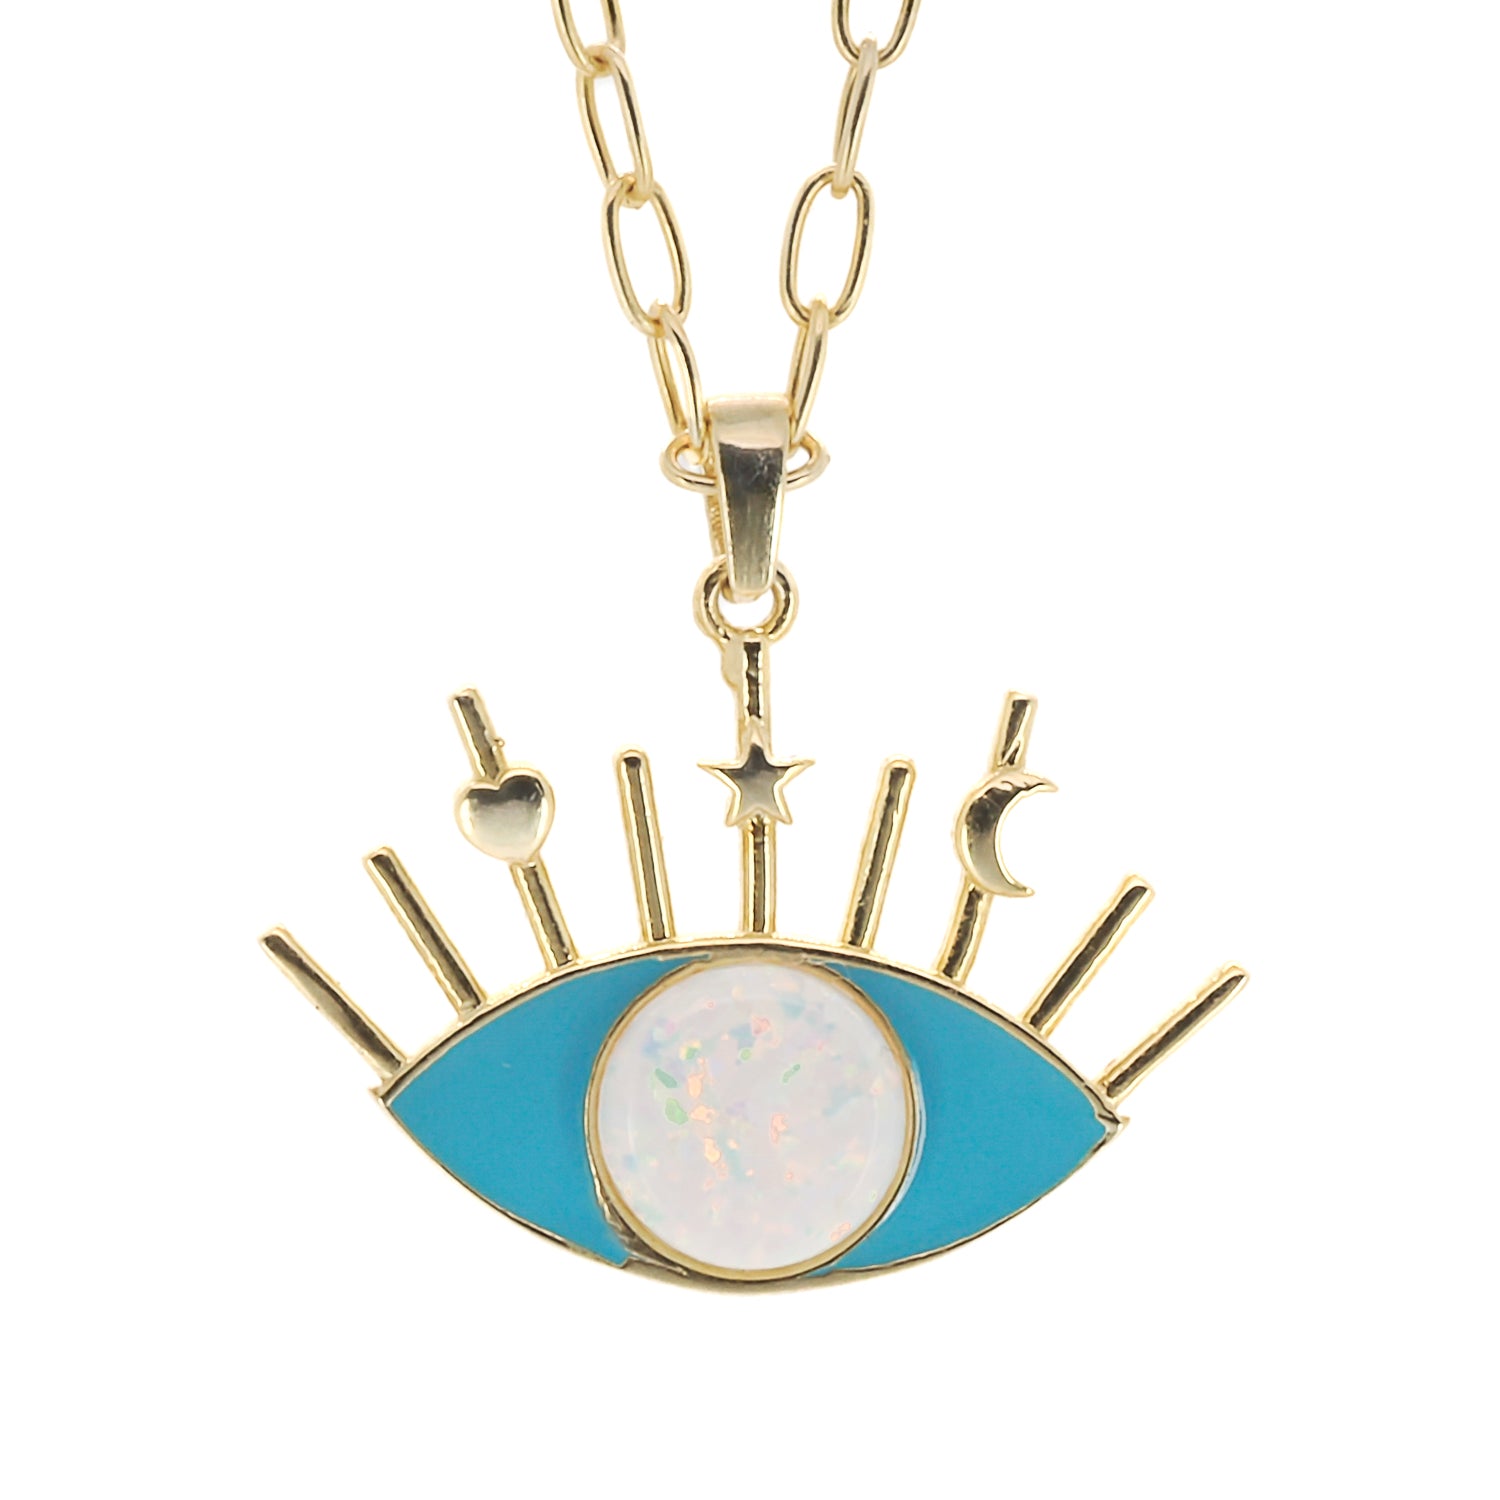 A close-up of the captivating combination of turquoise enamel and white opal on the Evil Eye pendant.